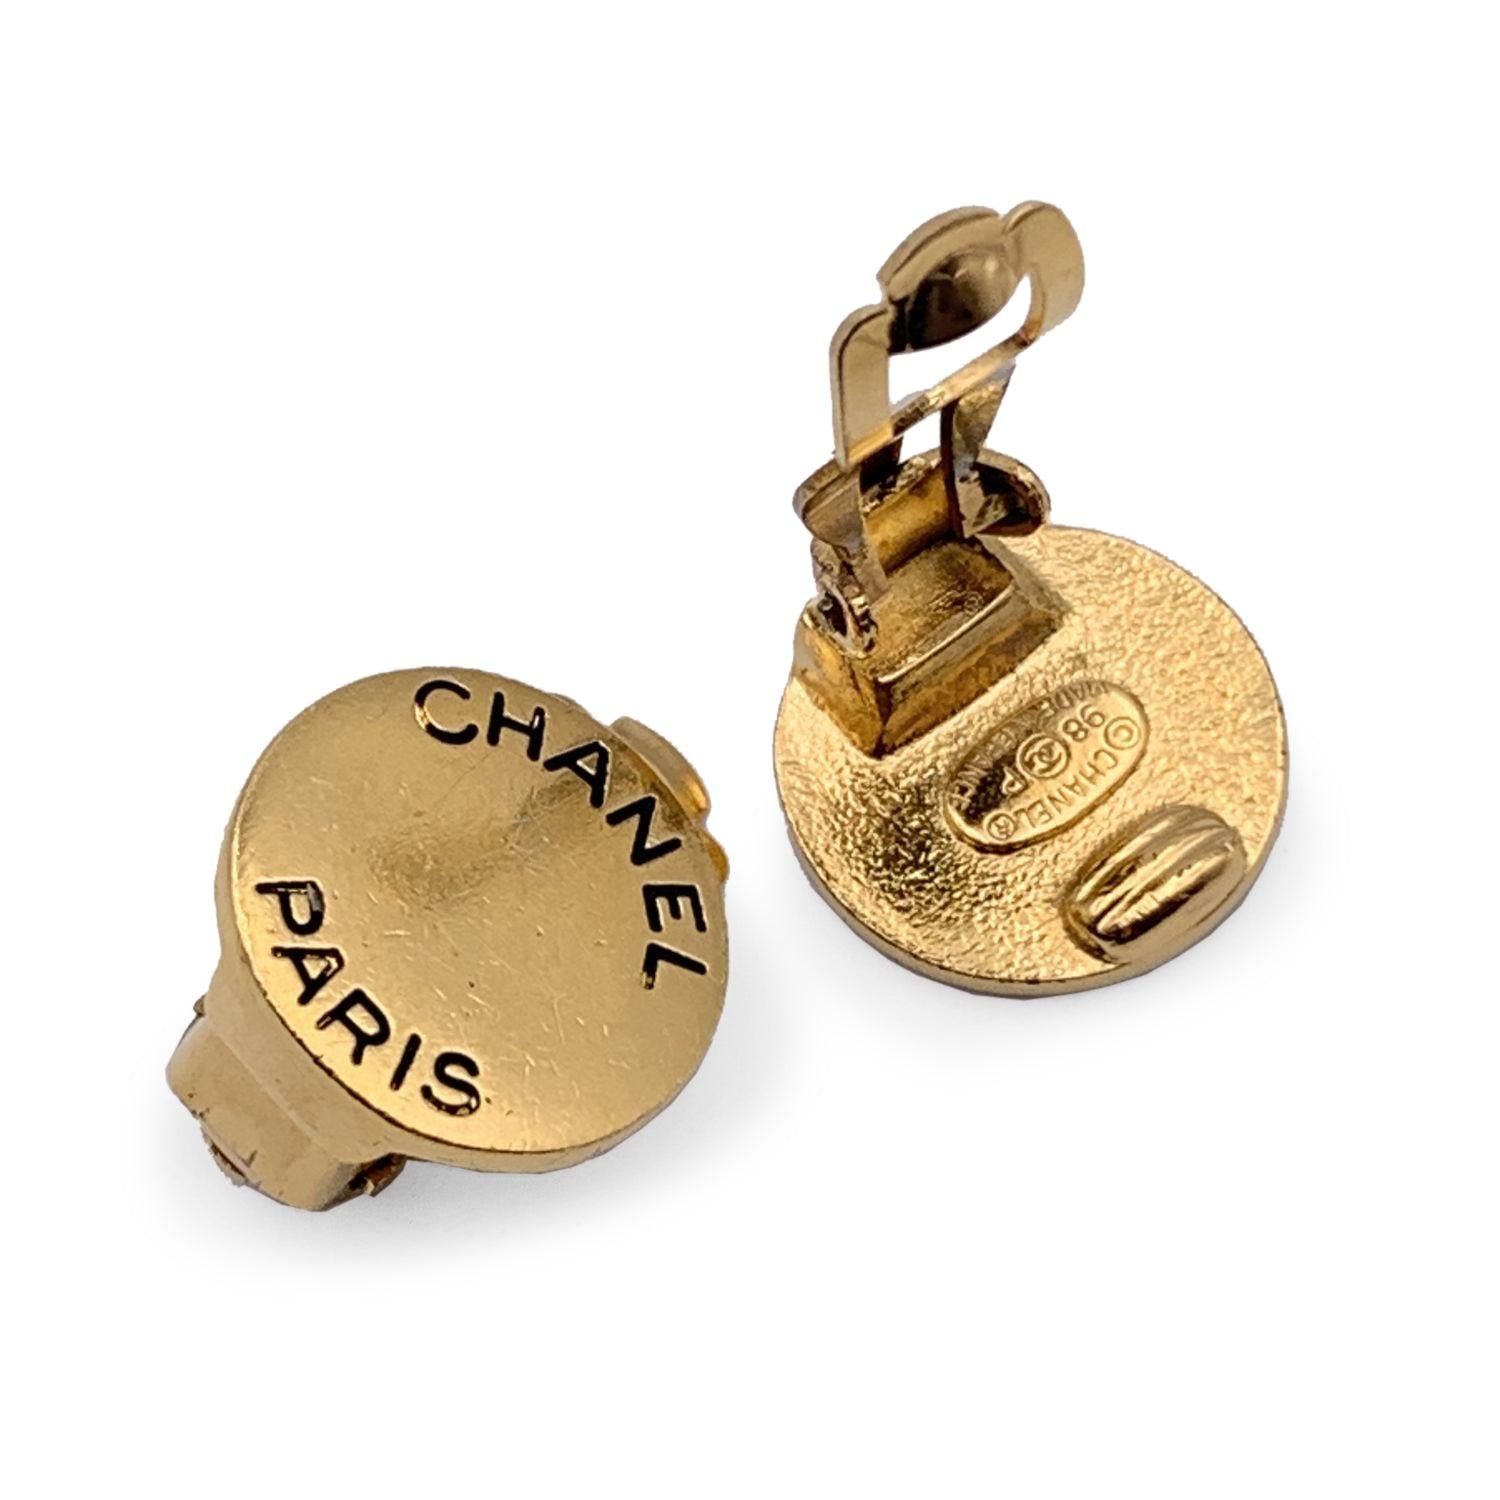 Beautiful vintage small round clip on earrings by CHANEL. They are finely crafted in gold metal with engraved 'Chanel Paris' logo. Clip on closure on the back. 'CHANEL - 98 CC P - Made in France' oval tag on the reverse of the earring. Width: 15 mm